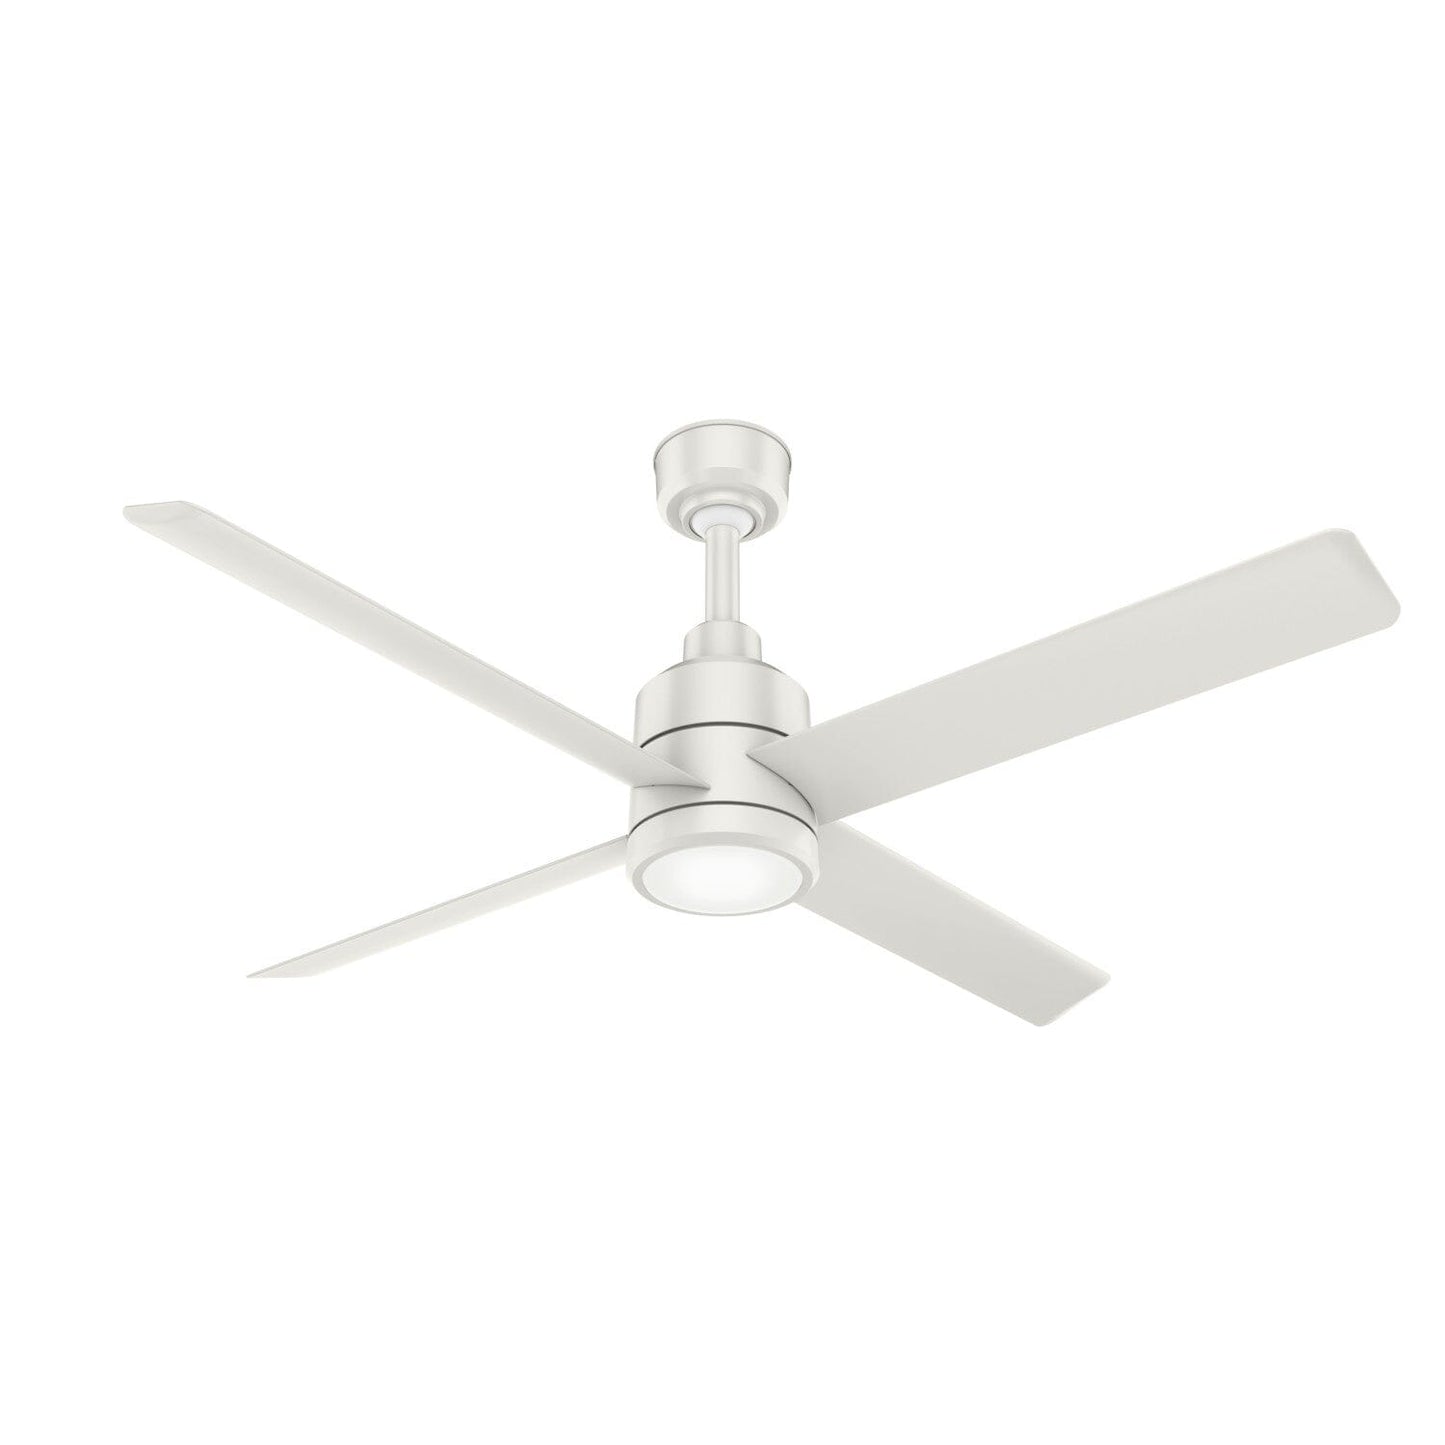 Trak Outdoor with light 72 inches 120V Ceiling Fans Hunter White - White 